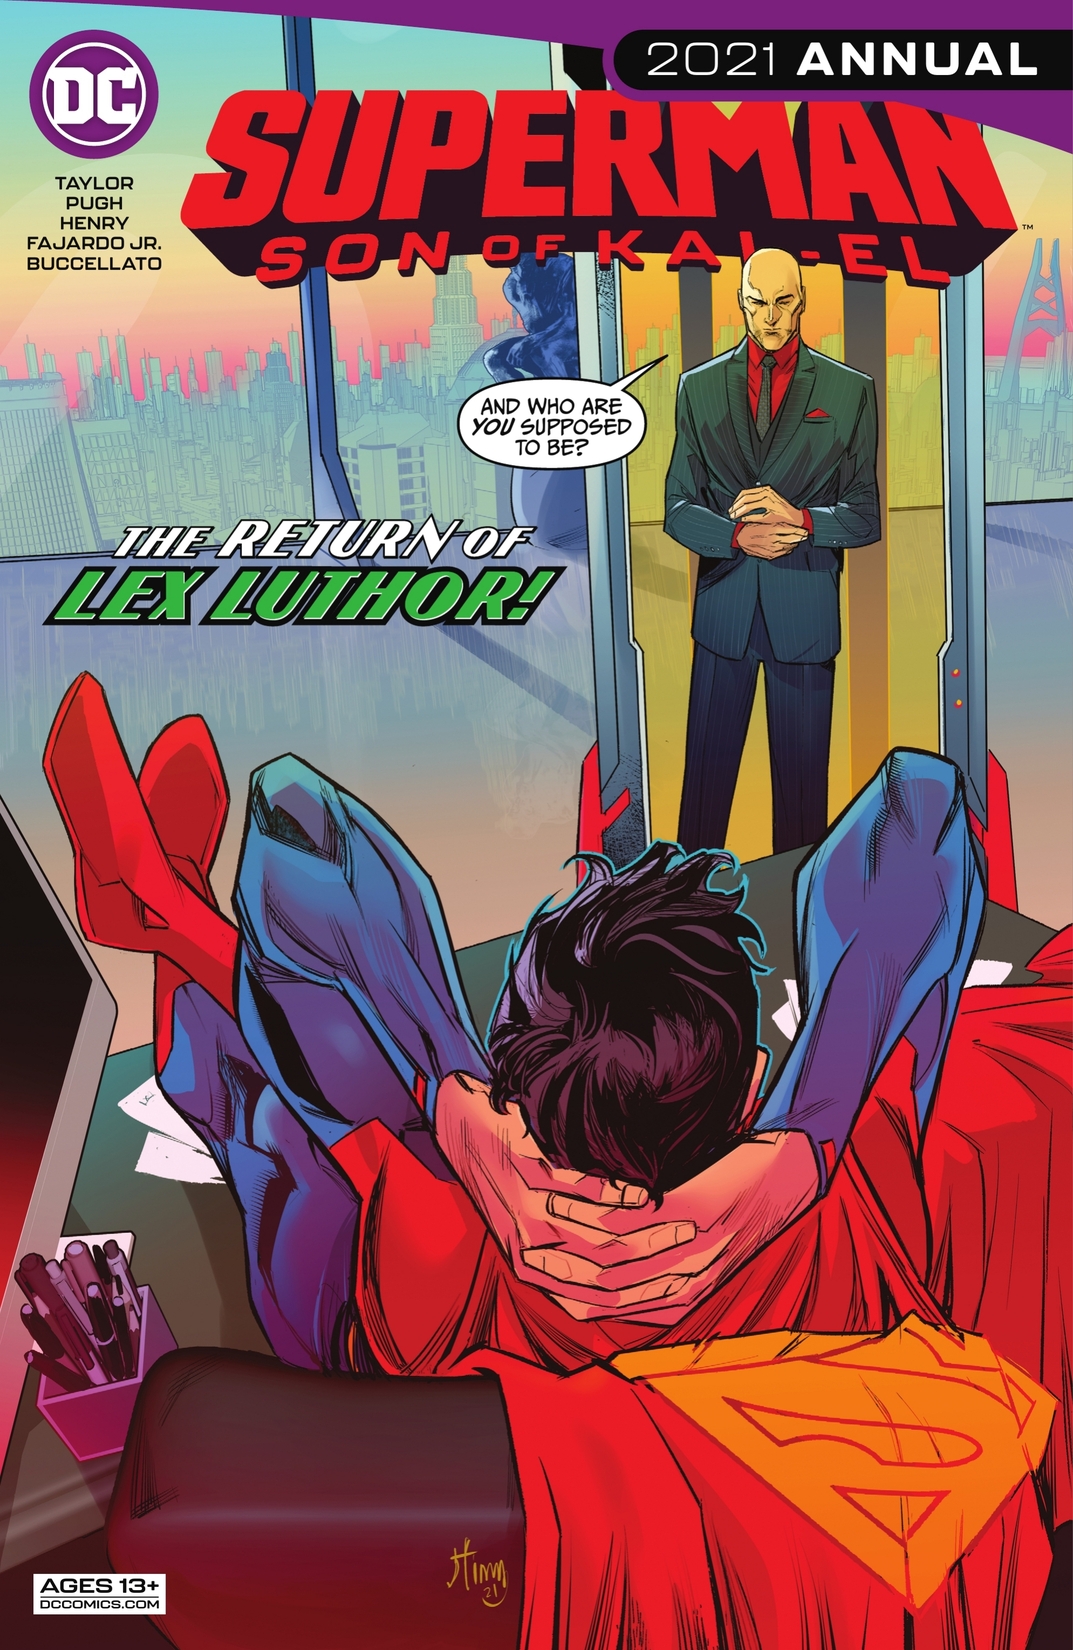 Superman: Son of Kal-El 2021 Annual #1 preview images